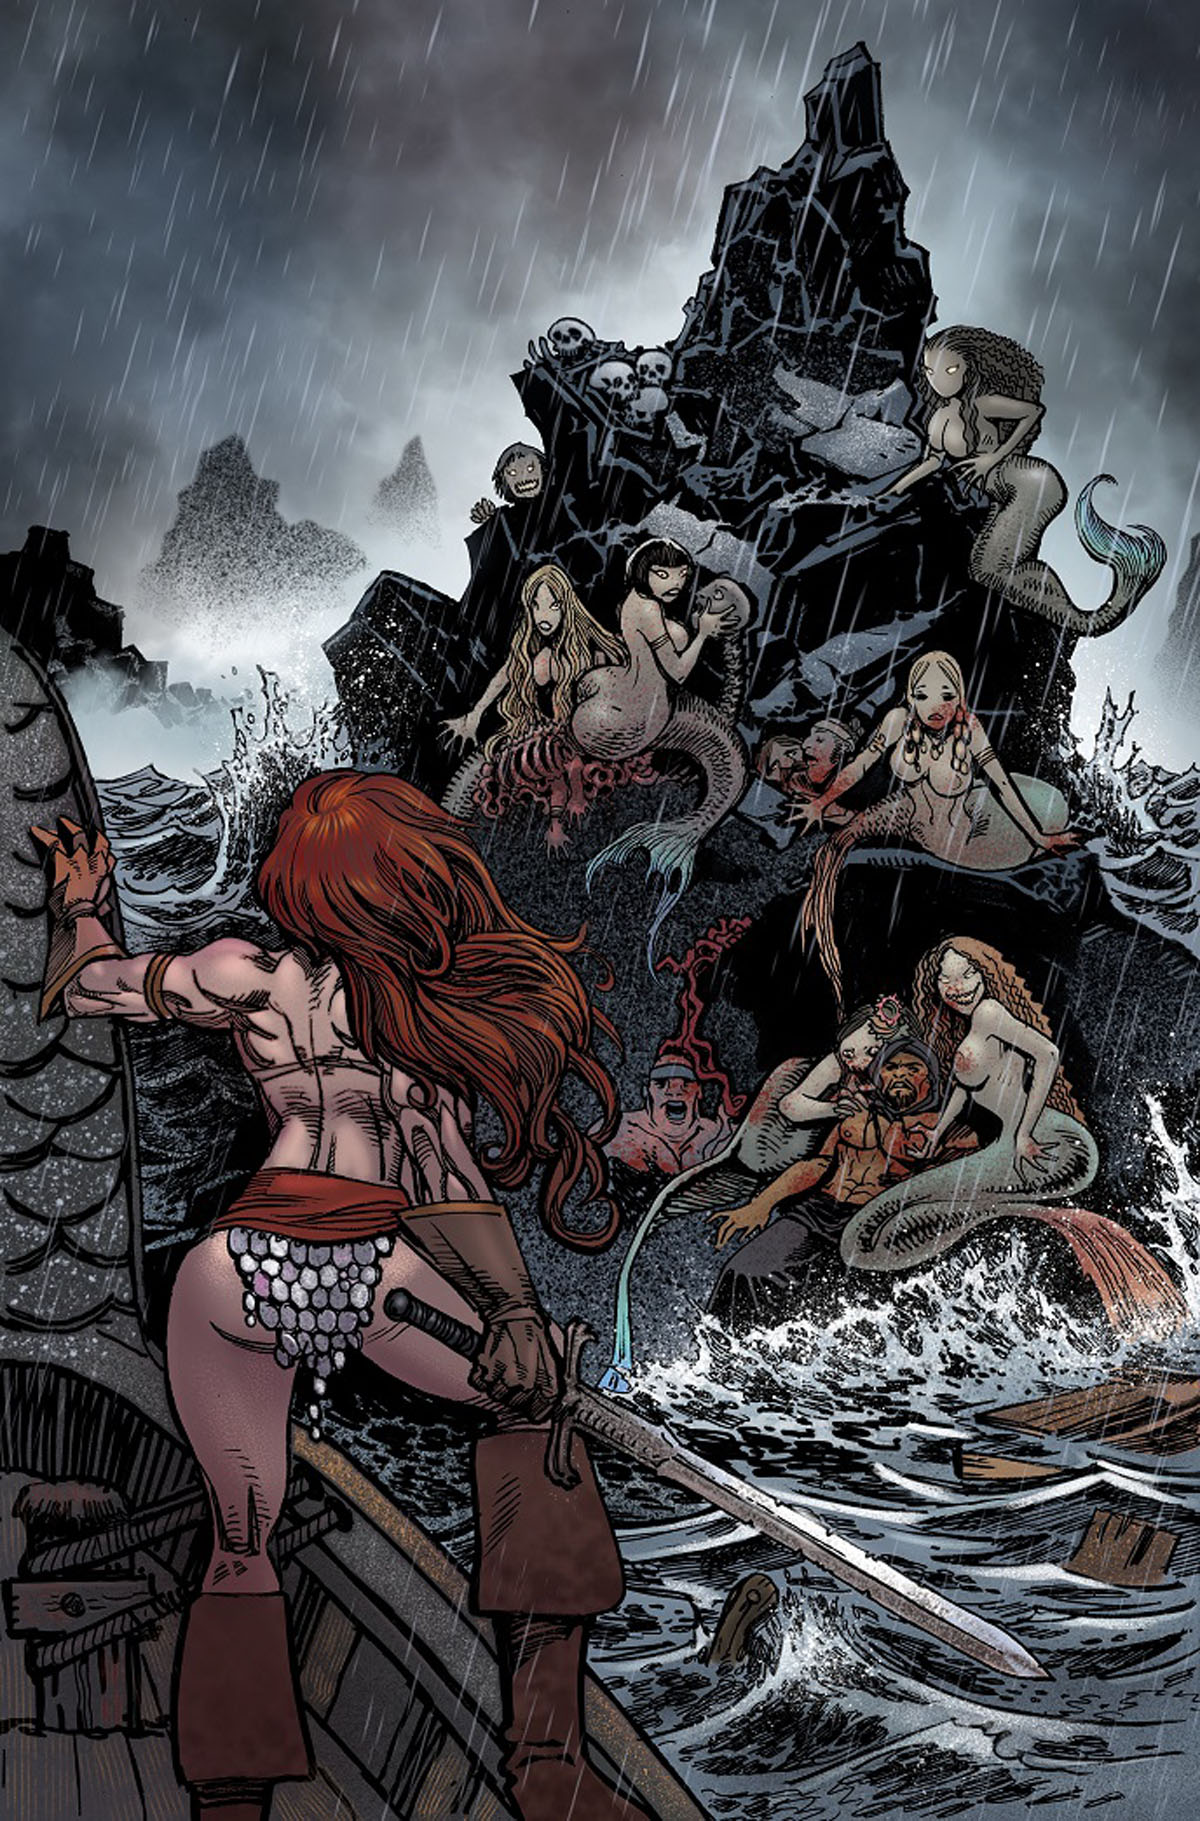 The Invincible Red Sonja #1 interior pages #6